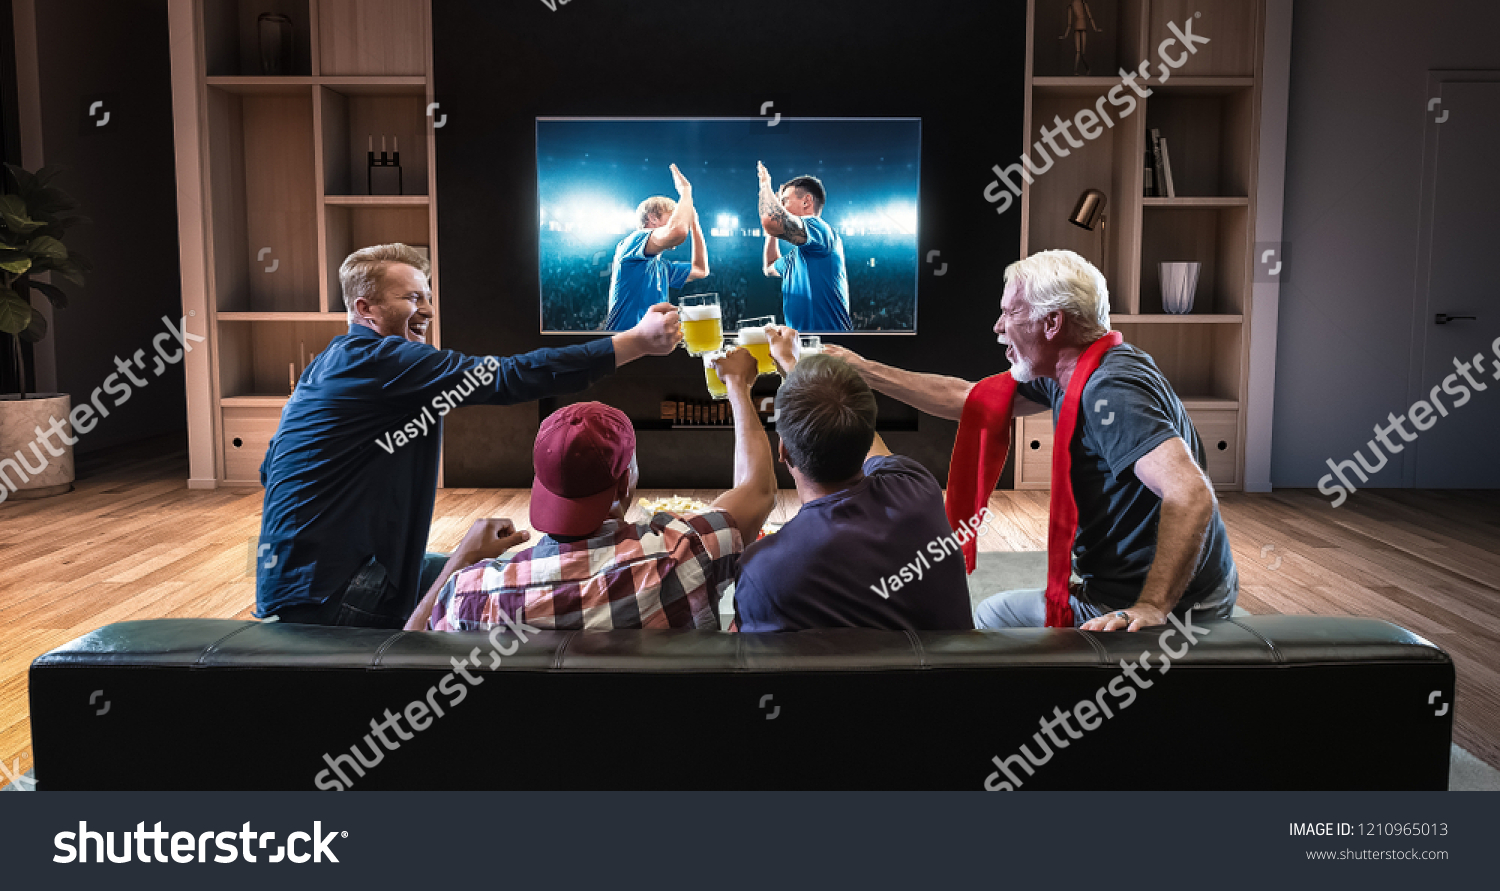 Group of fans are watching a soccer moment on the TV and celebrating a goal, sitting on the couch in the living room. The living room is made in 3D. #1210965013